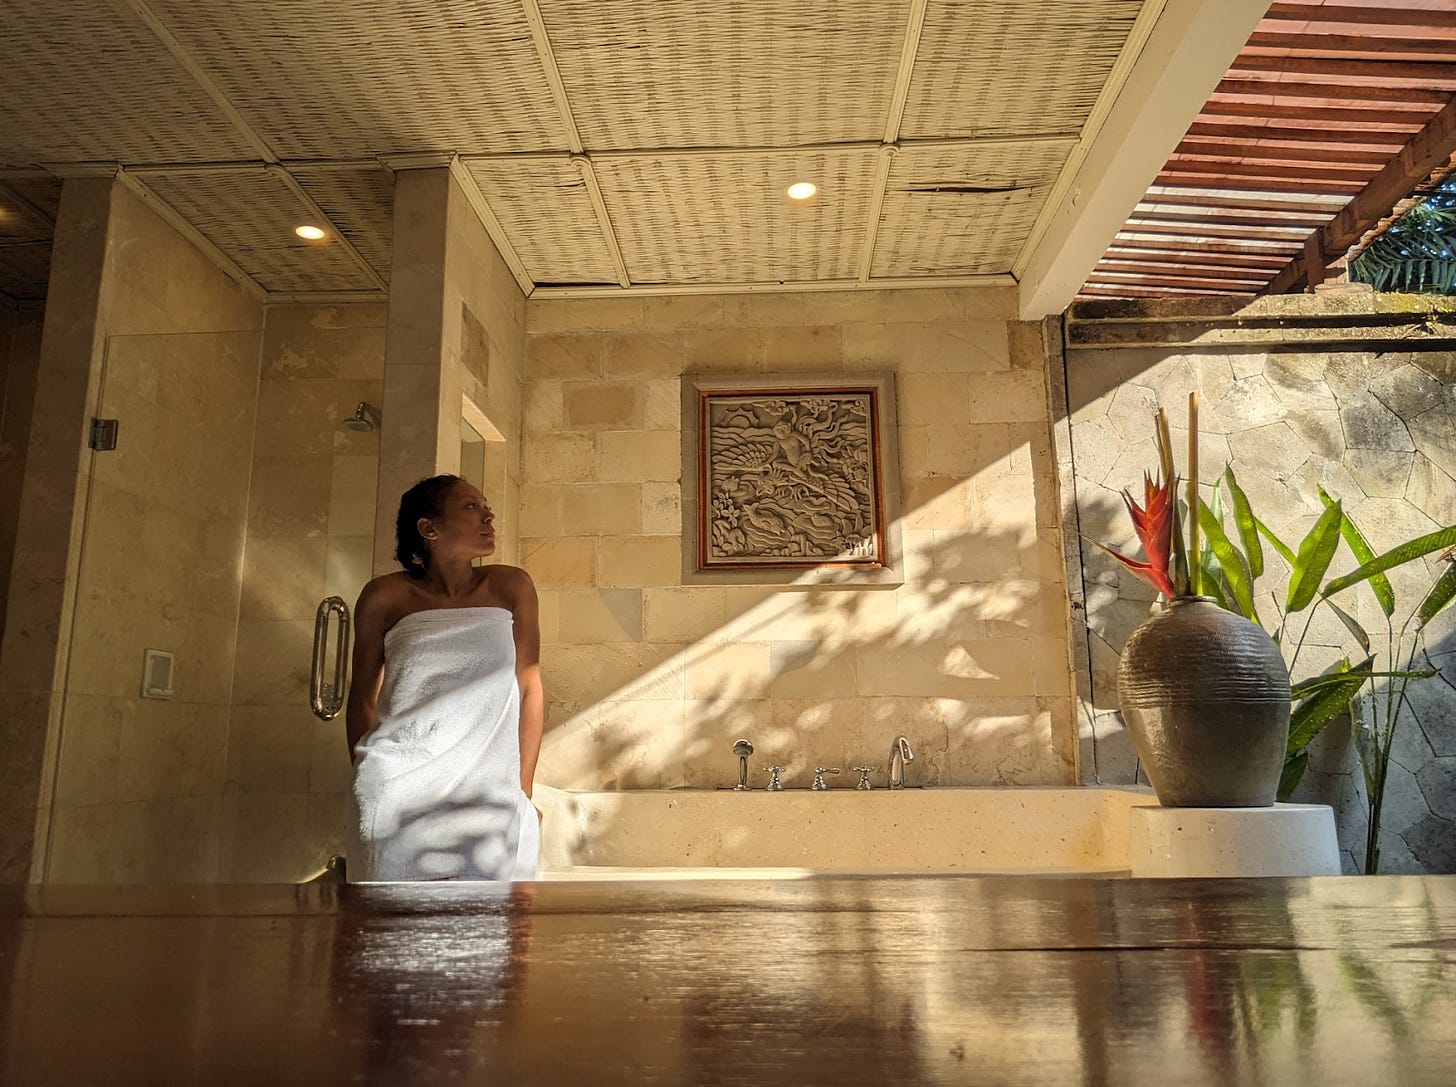 Nathalie sits on the edge of a bathtub with the sun hitting the marble.